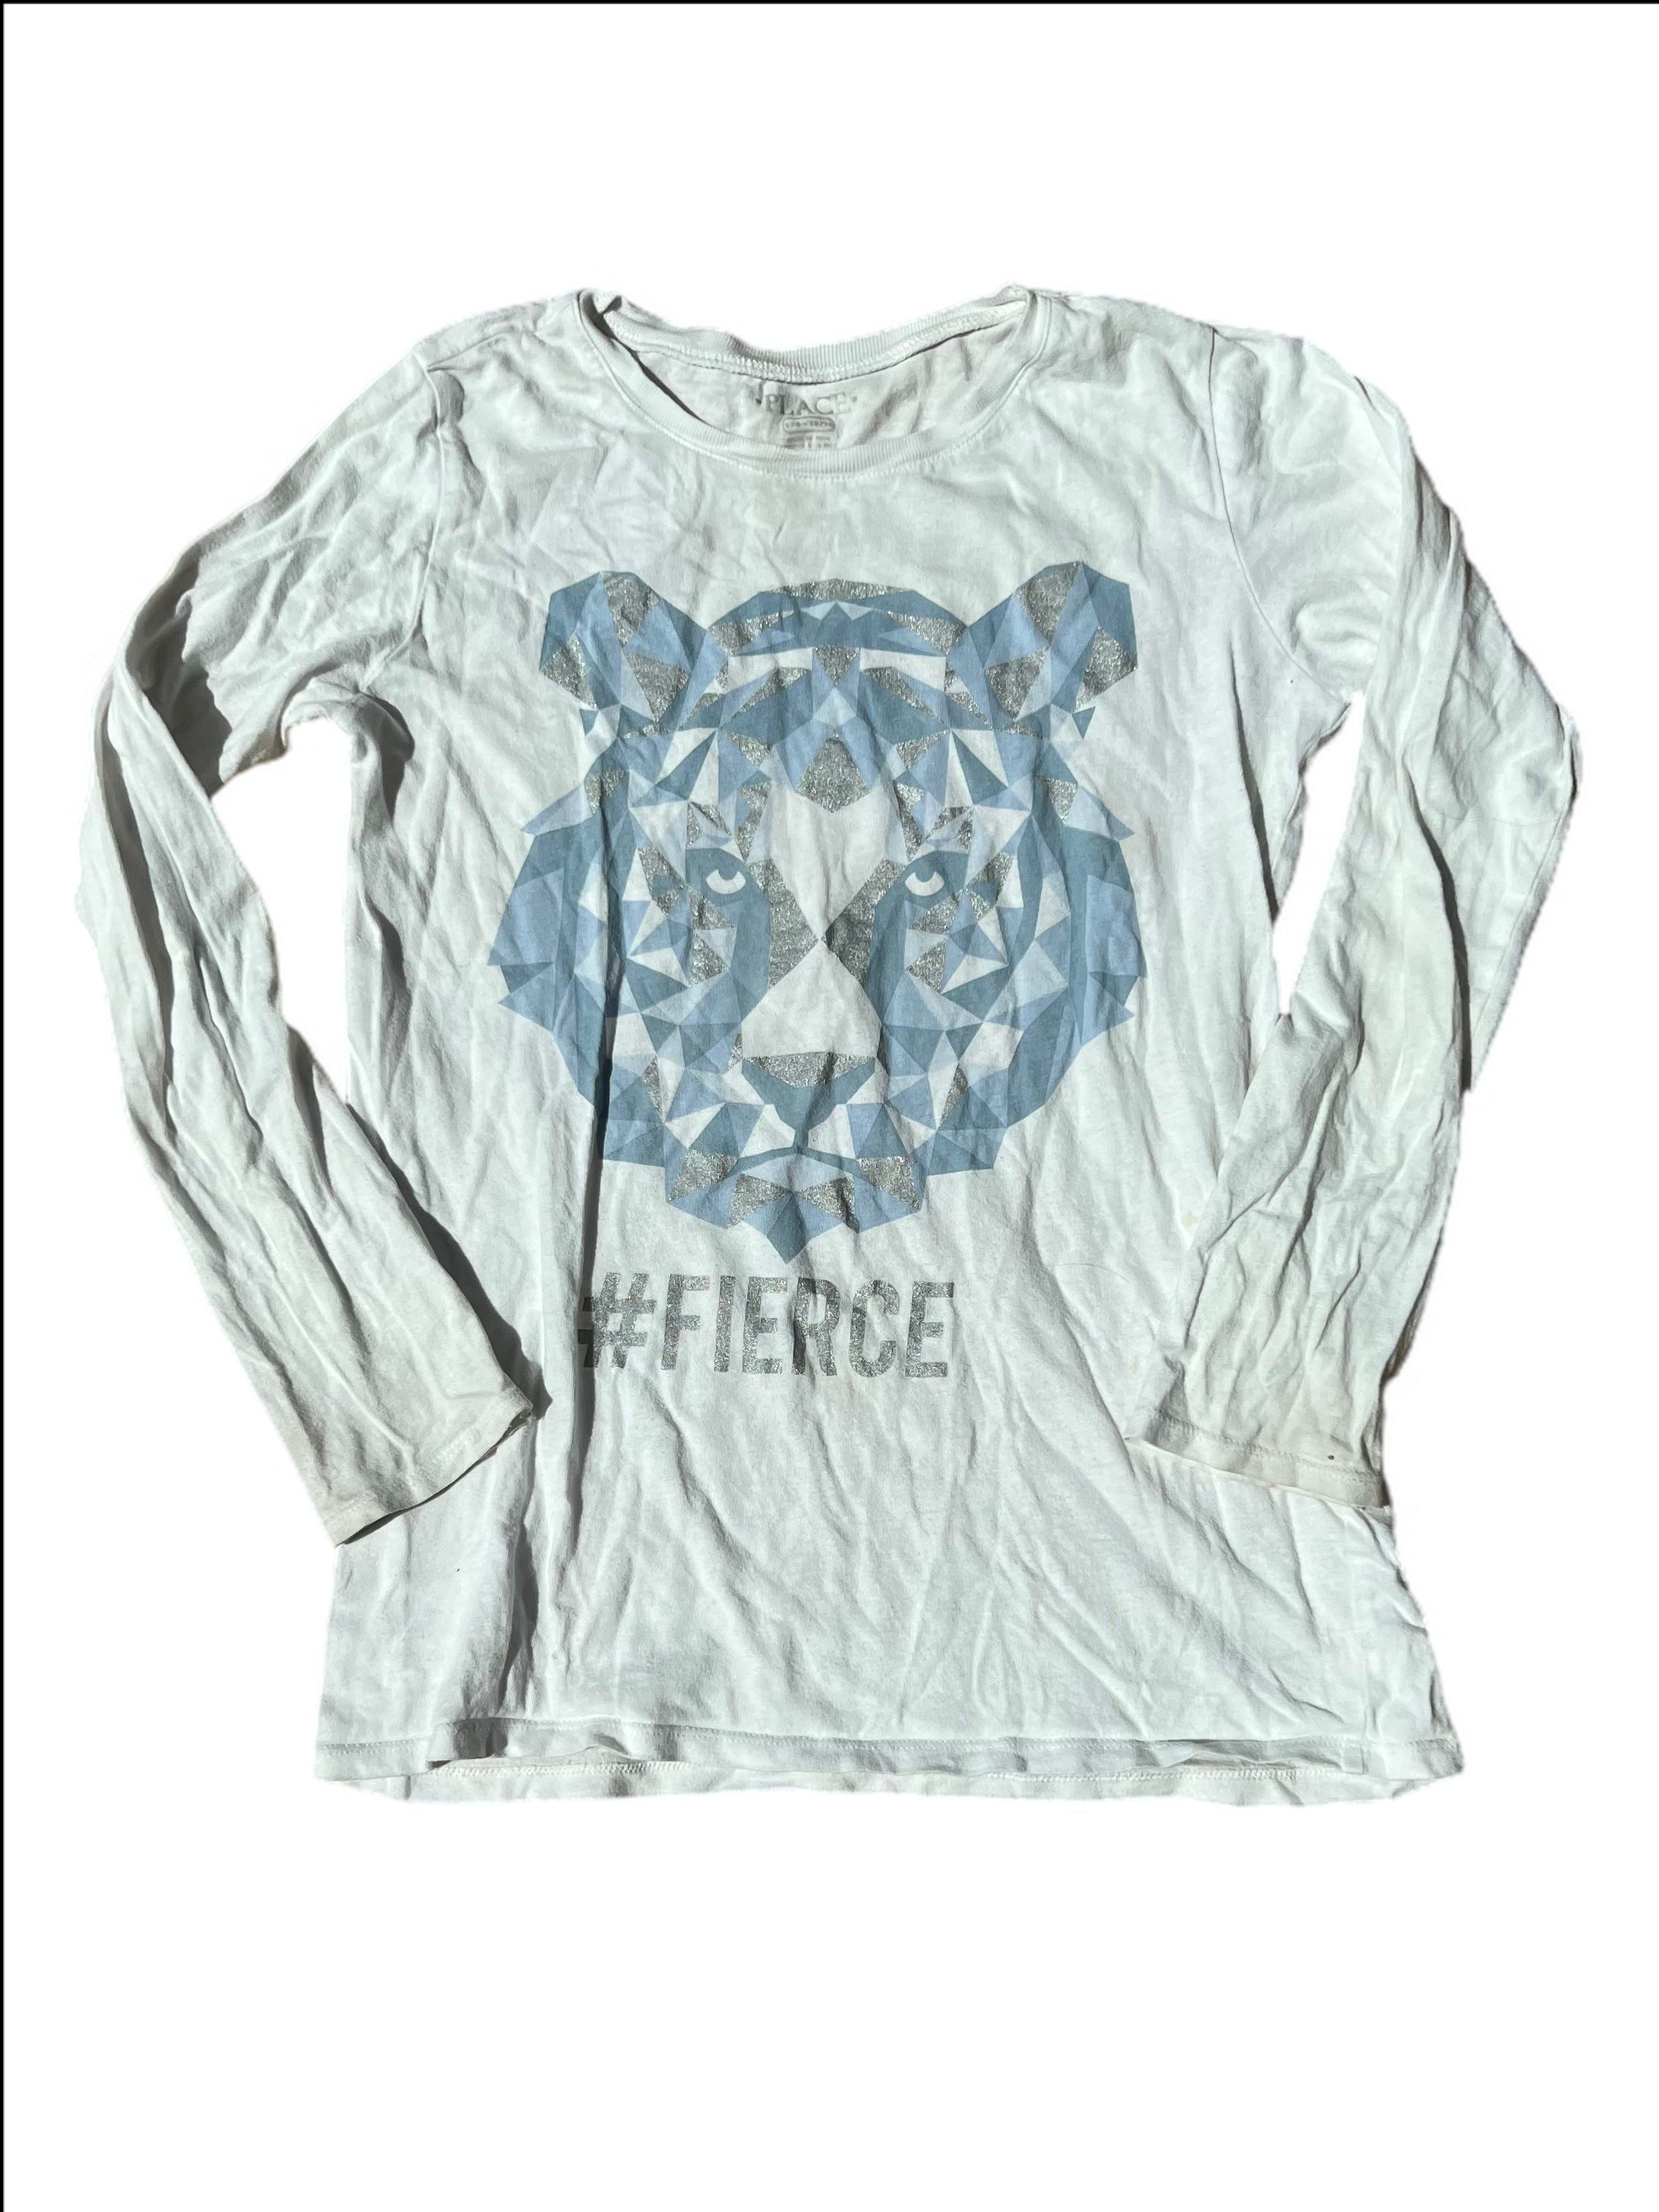 Long Sleeve Top with Tiger Applique #Fierce